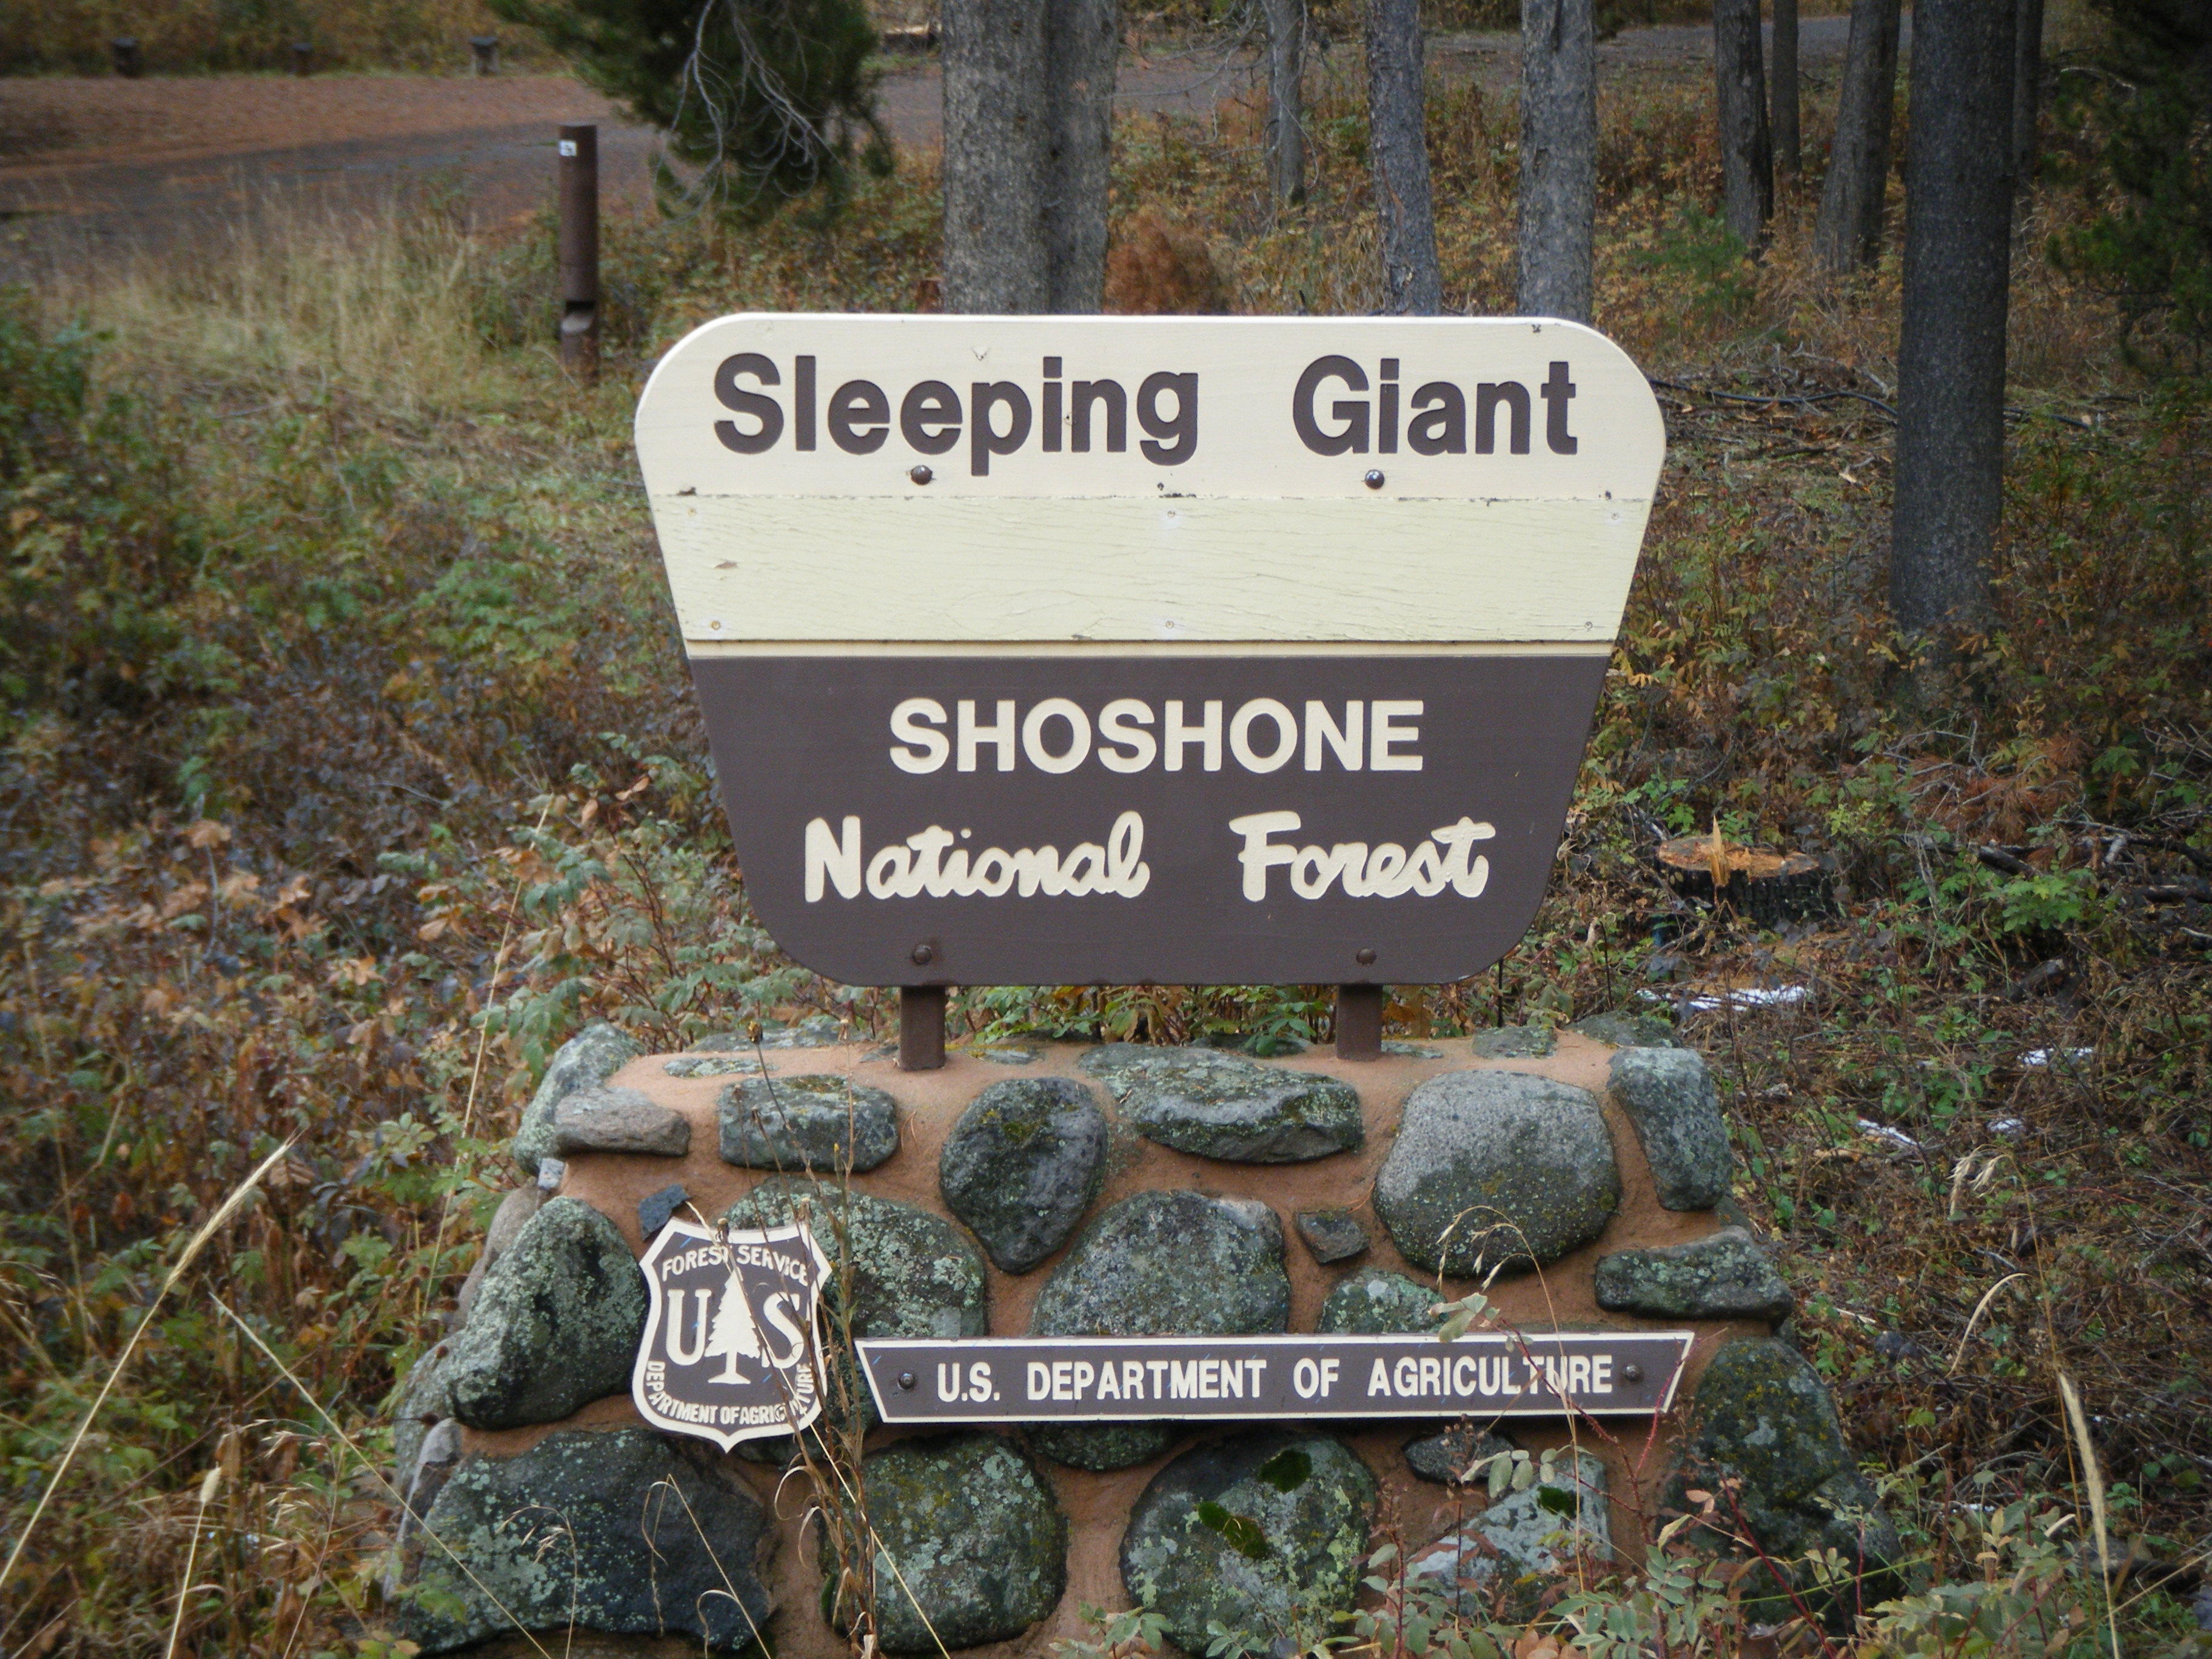 Photograph of Sleeping Giant Picnic Site